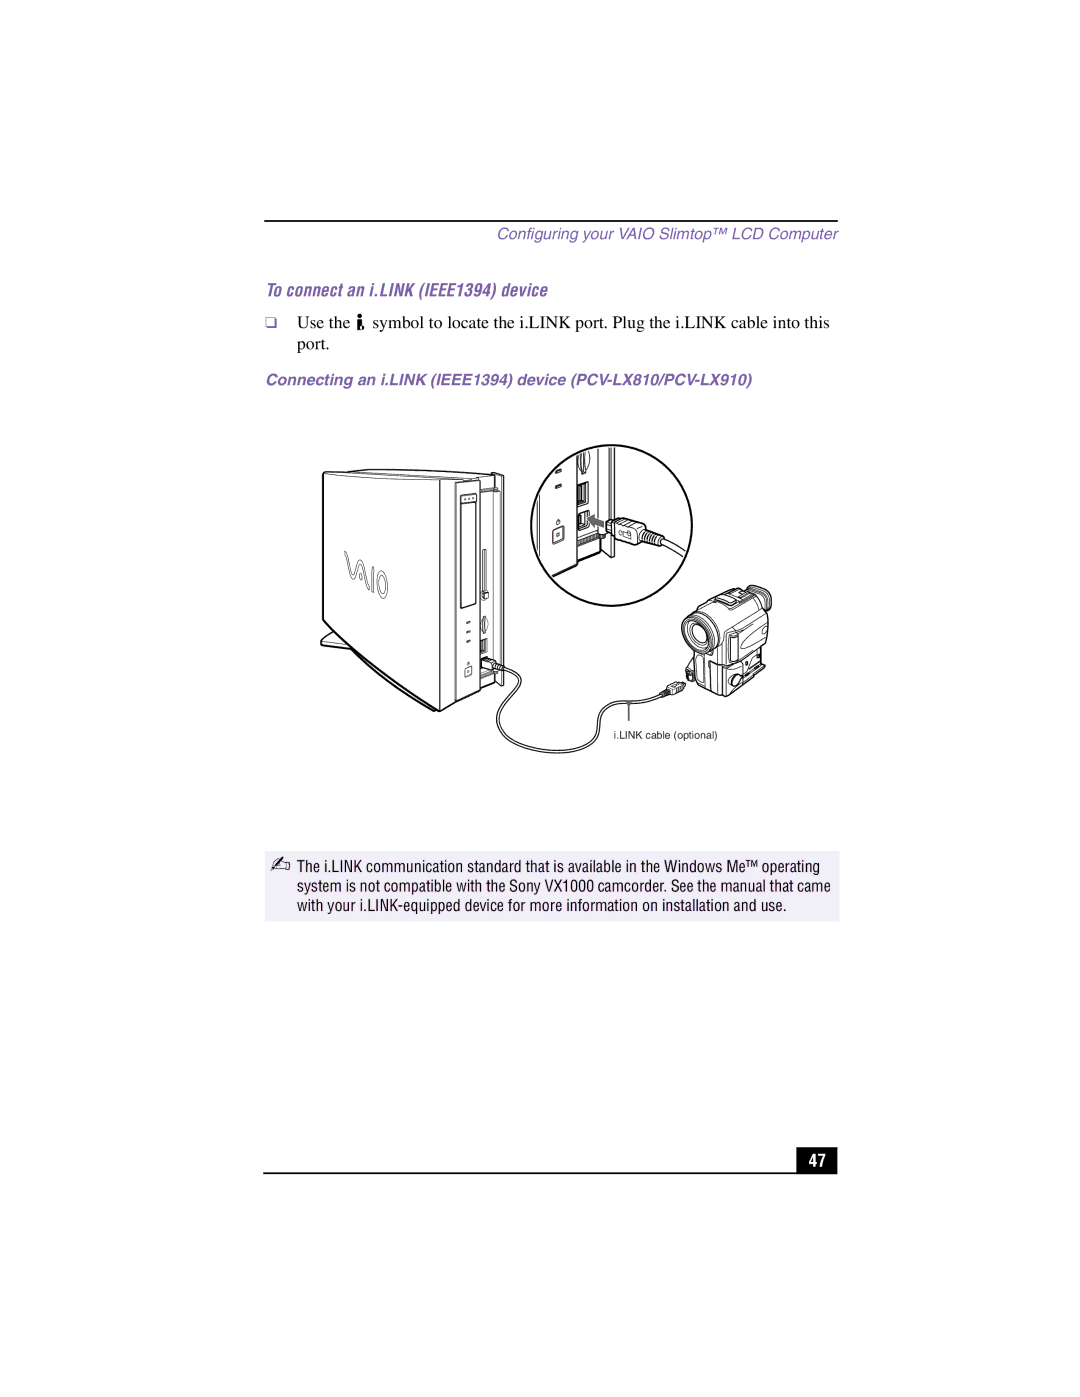 Sony manual To connect an i.LINK IEEE1394 device, Connecting an i.LINK IEEE1394 device PCV-LX810/PCV-LX910 